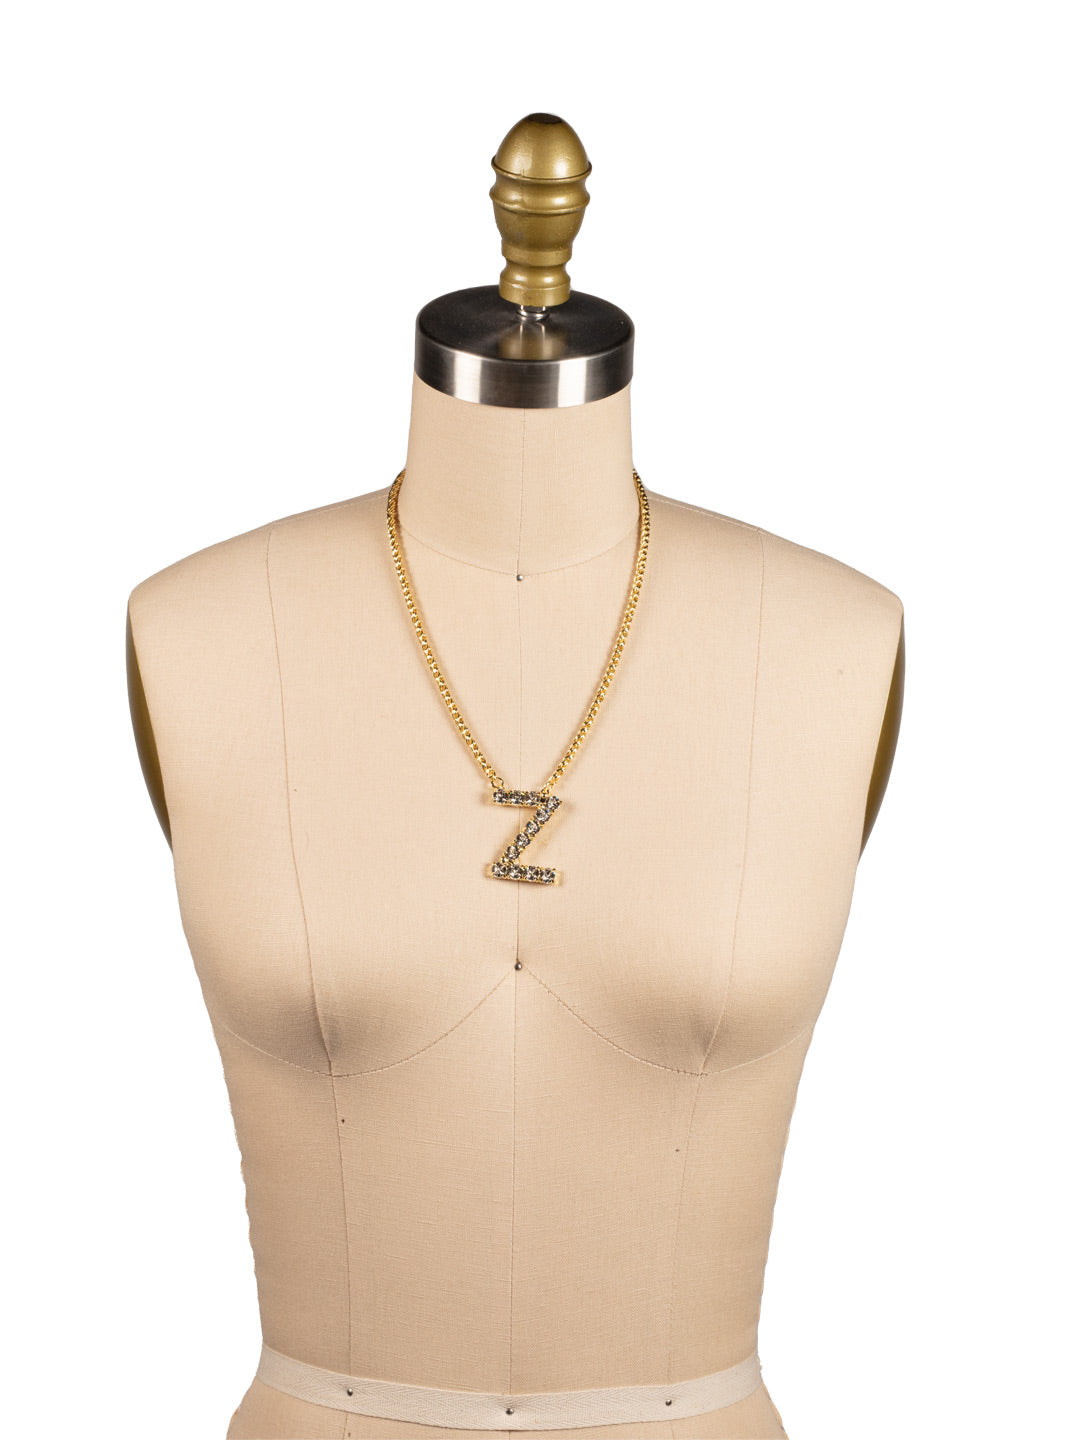 Z Initial Rope Pendant Necklace - NFK45BGCRY